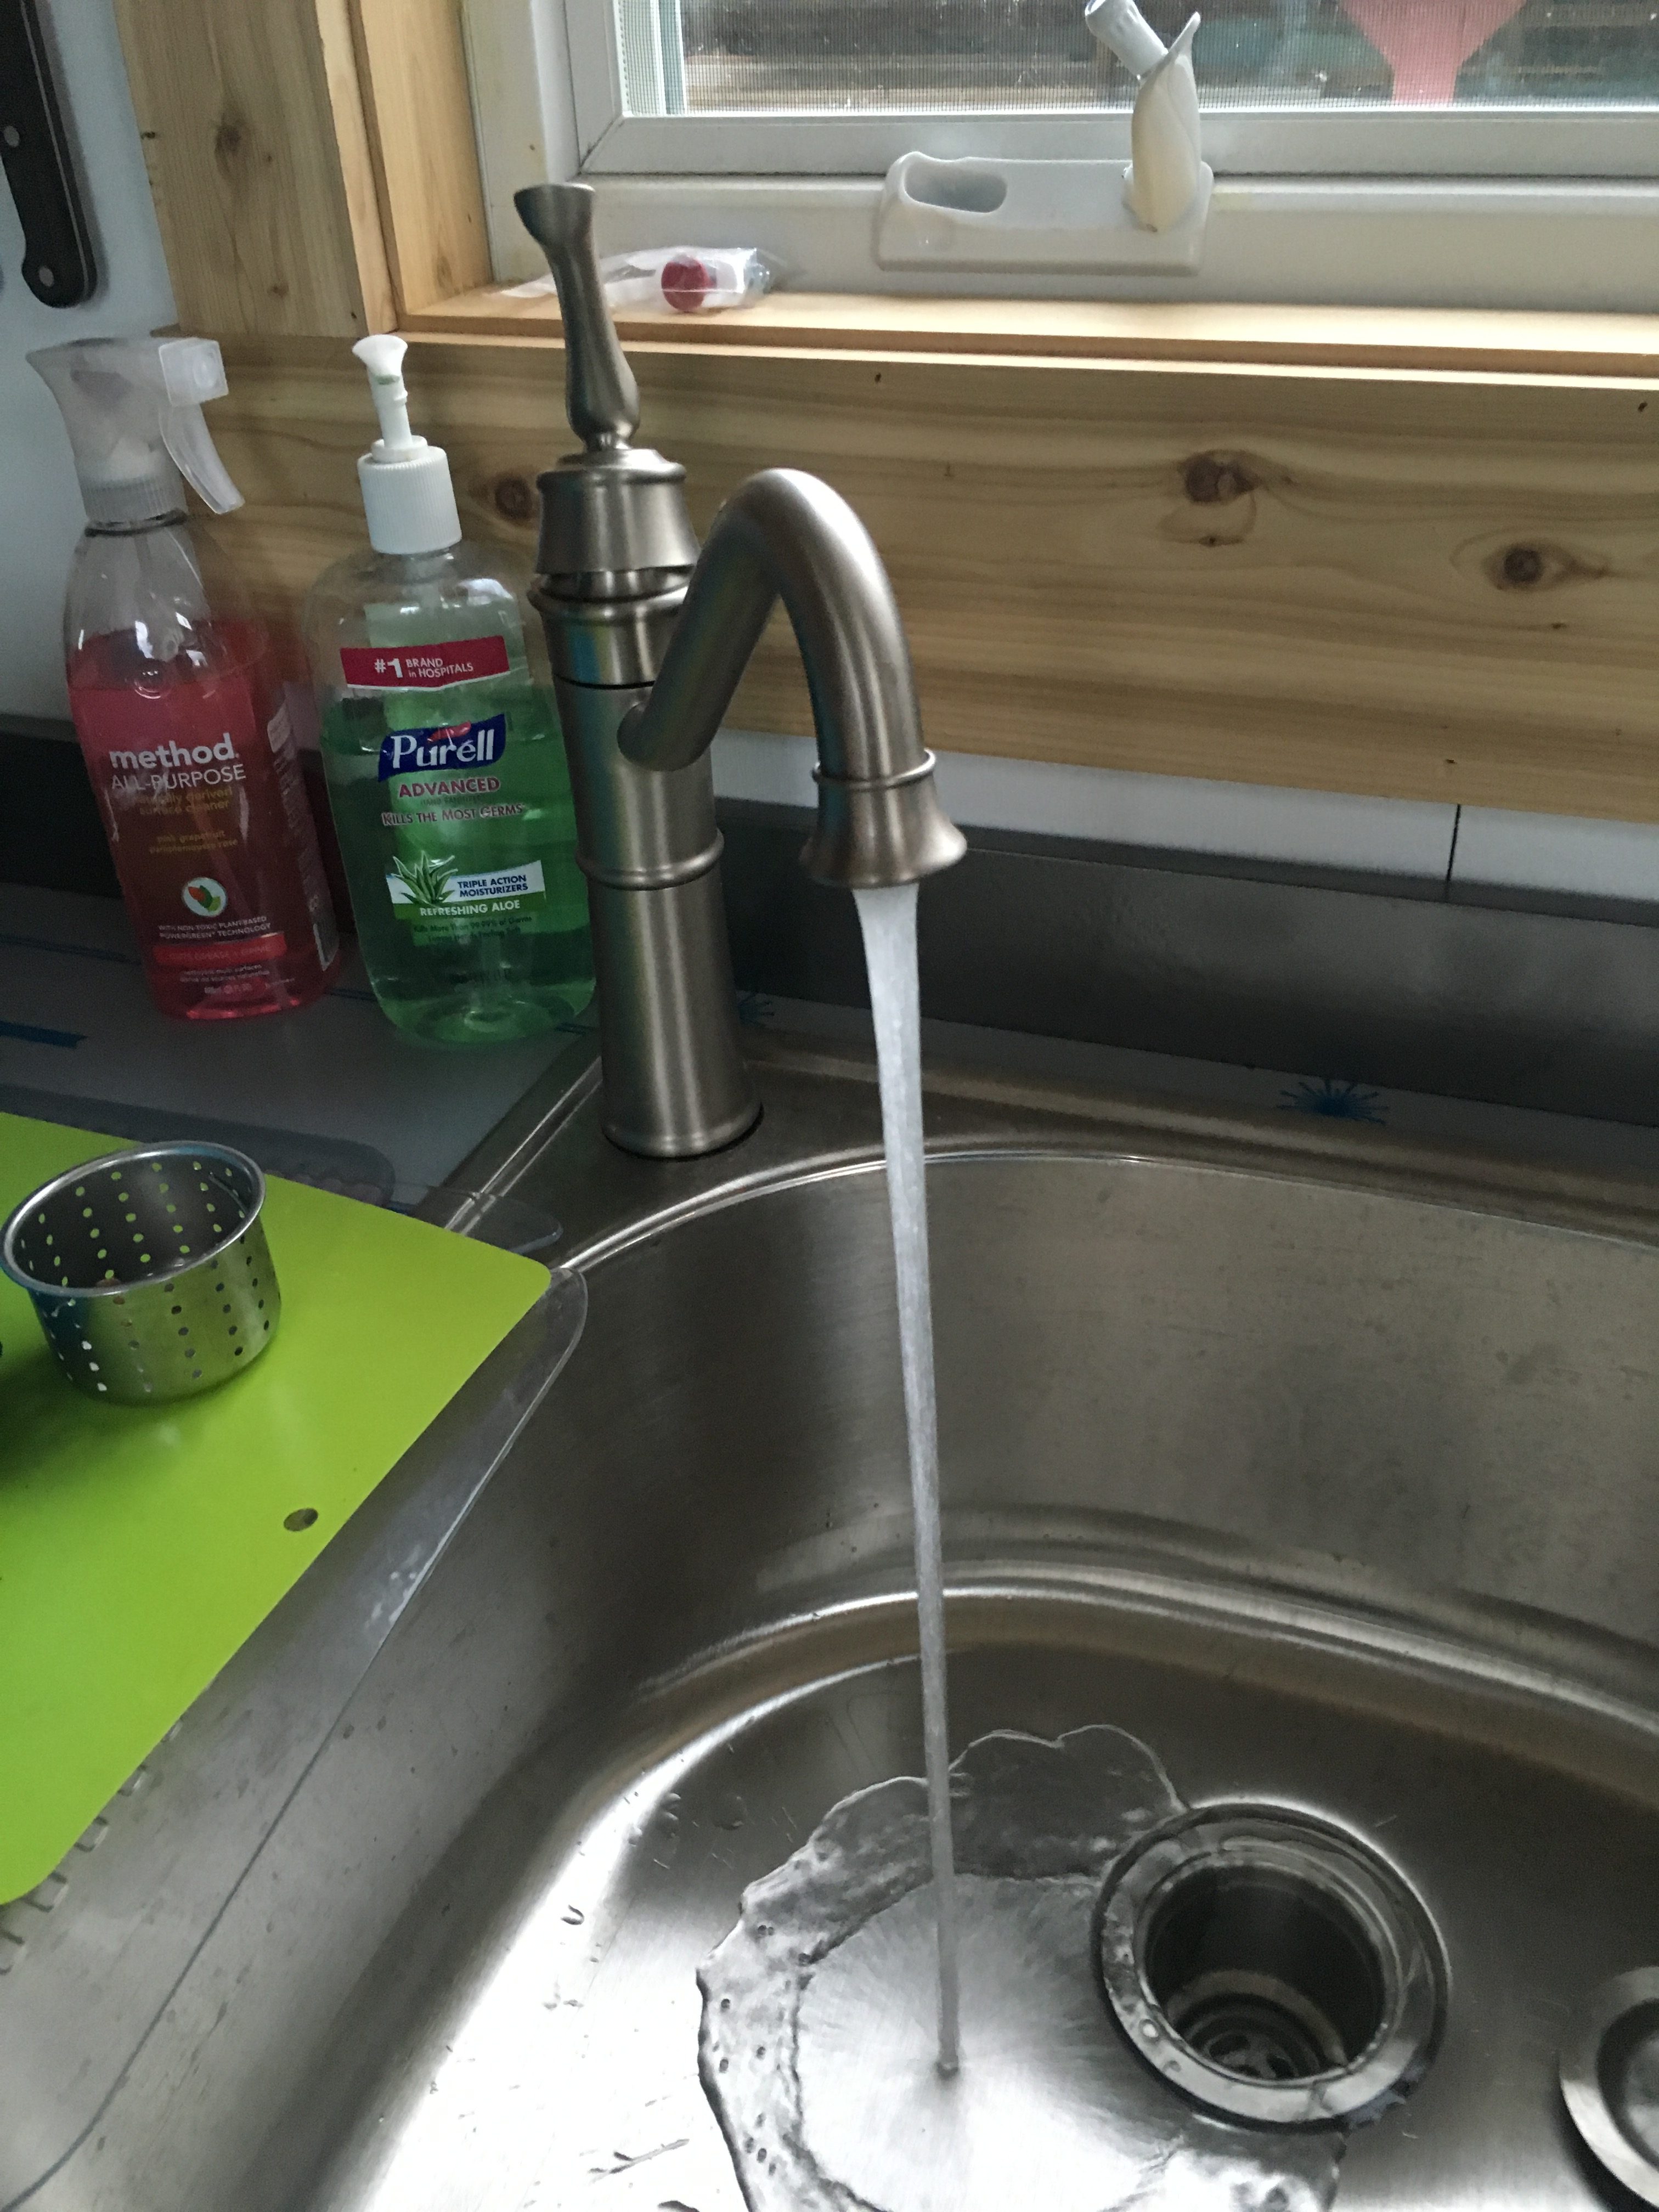 LARGE D BOWL SINK - LET THERE BE WATER